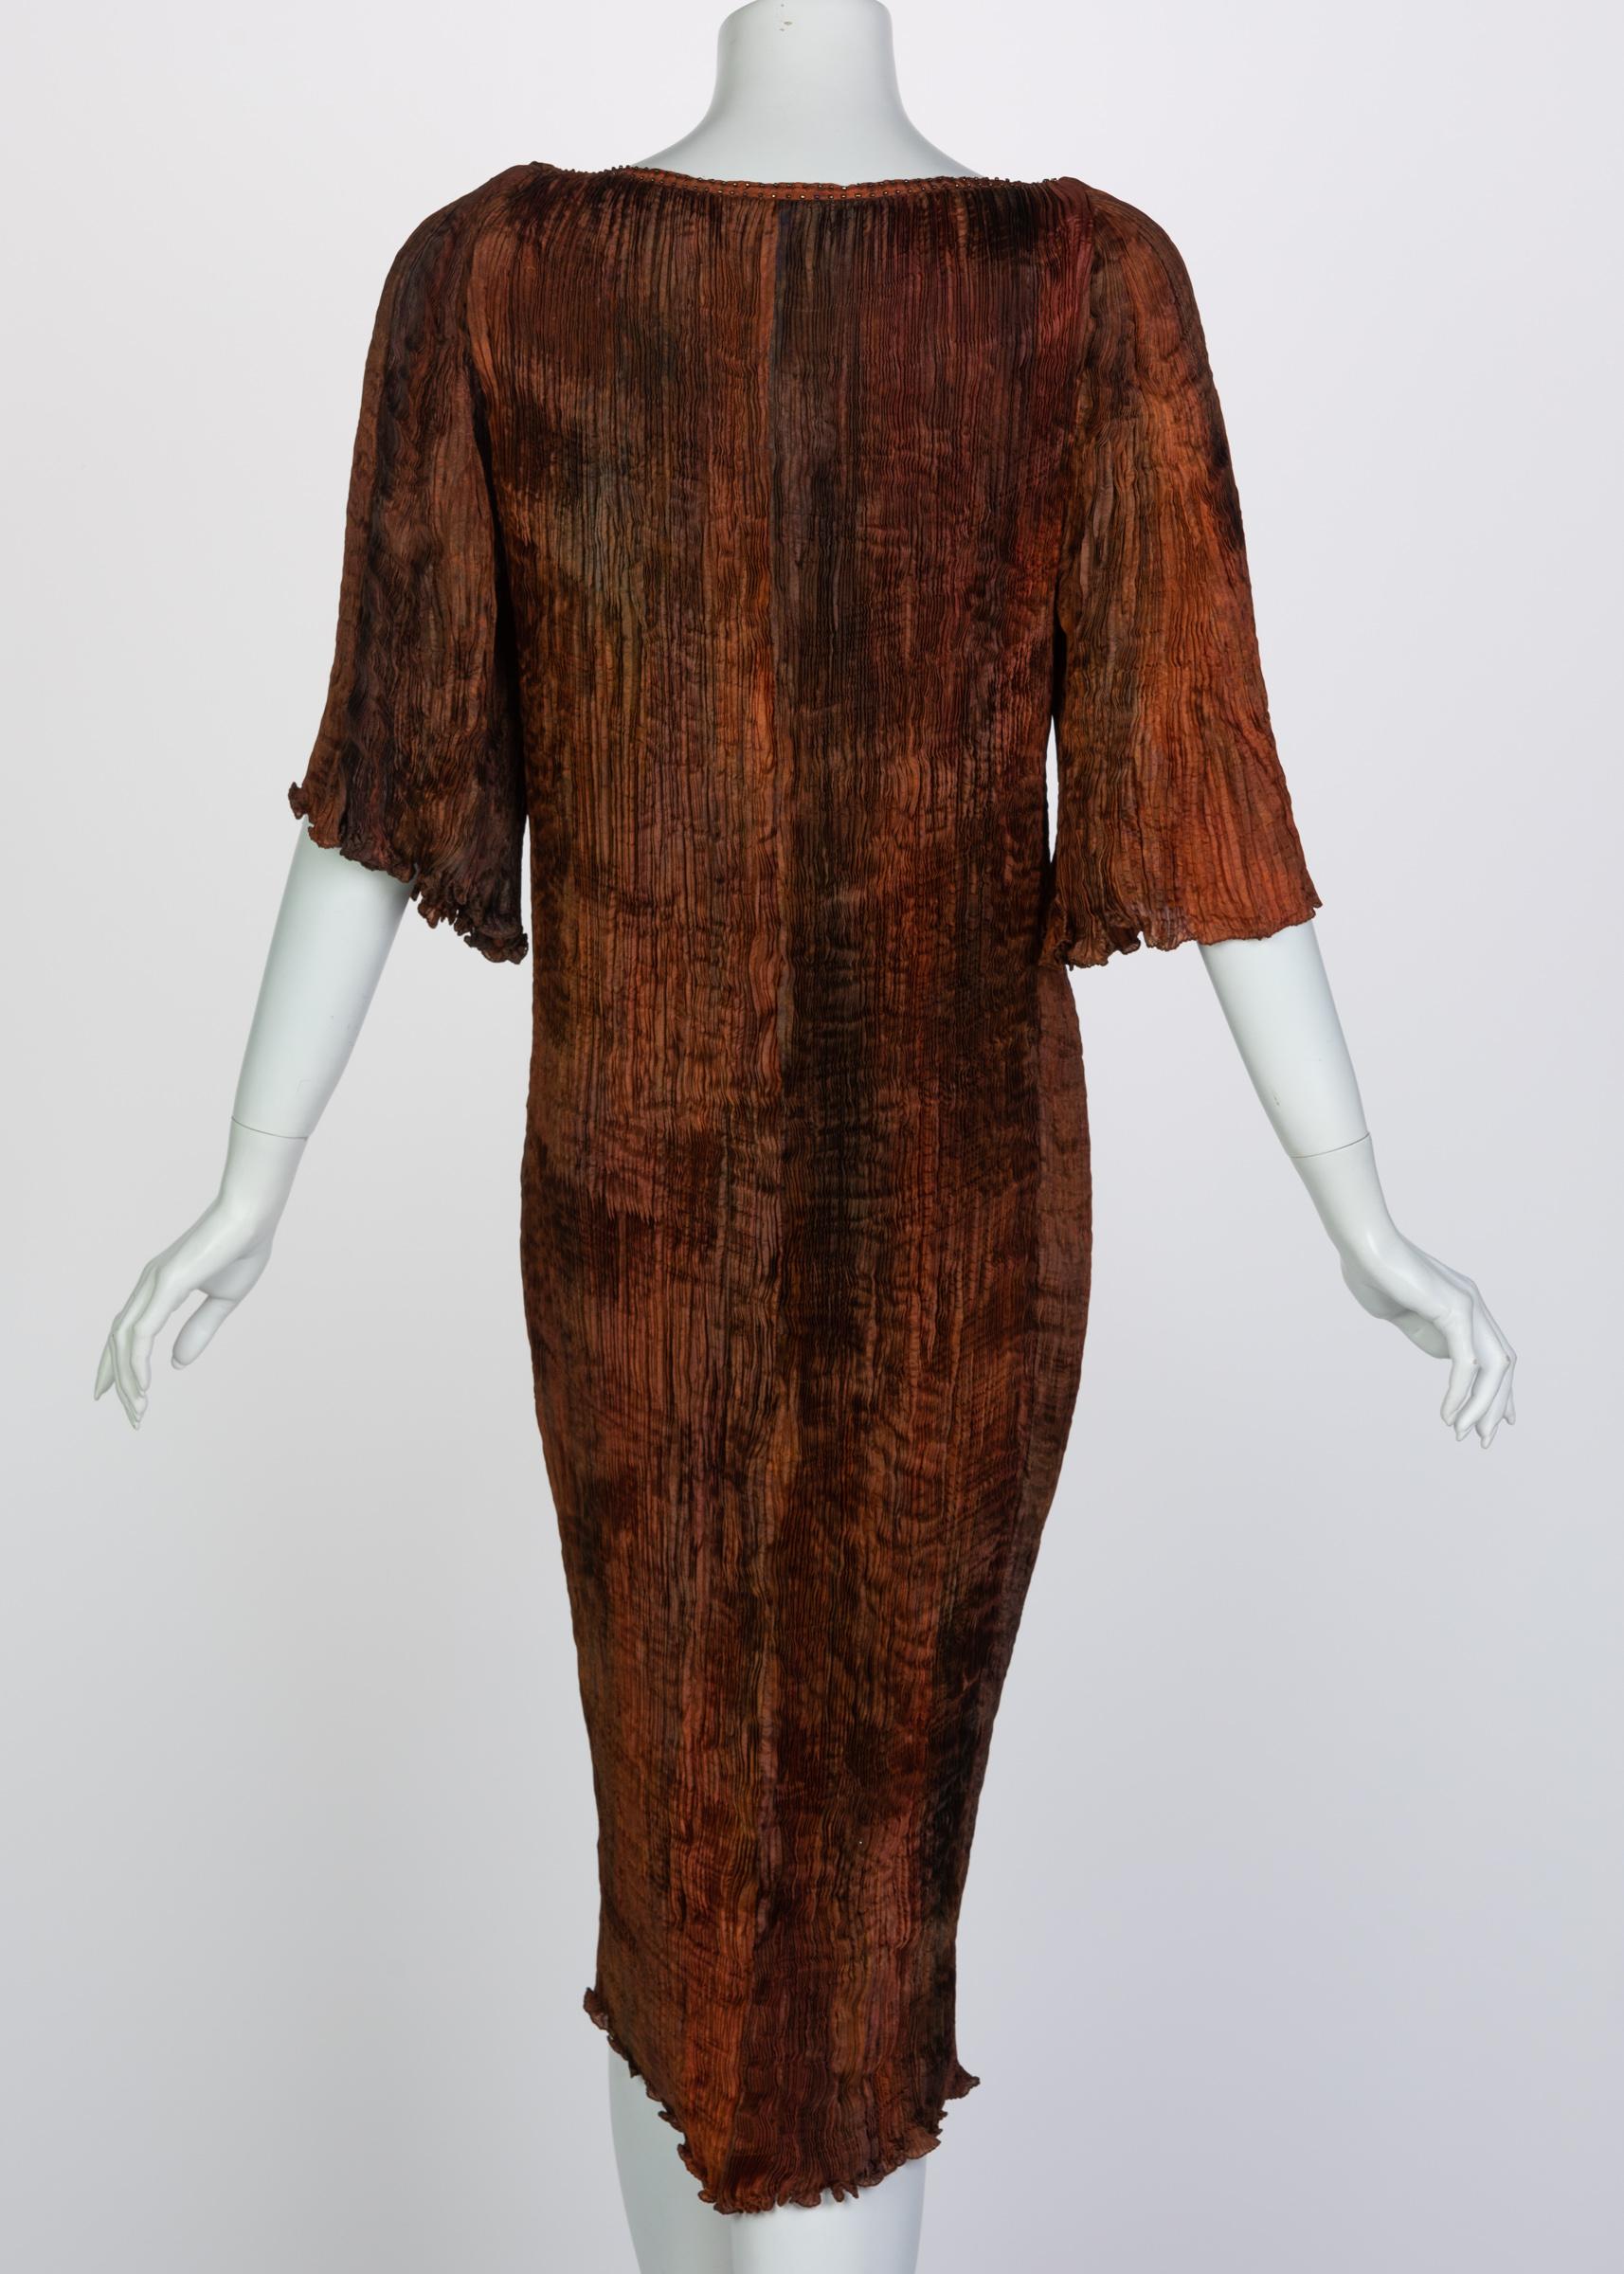 Black Patricia Lester Copper Brown Silk Fortuny Pleated Dress & Belt, 1980s